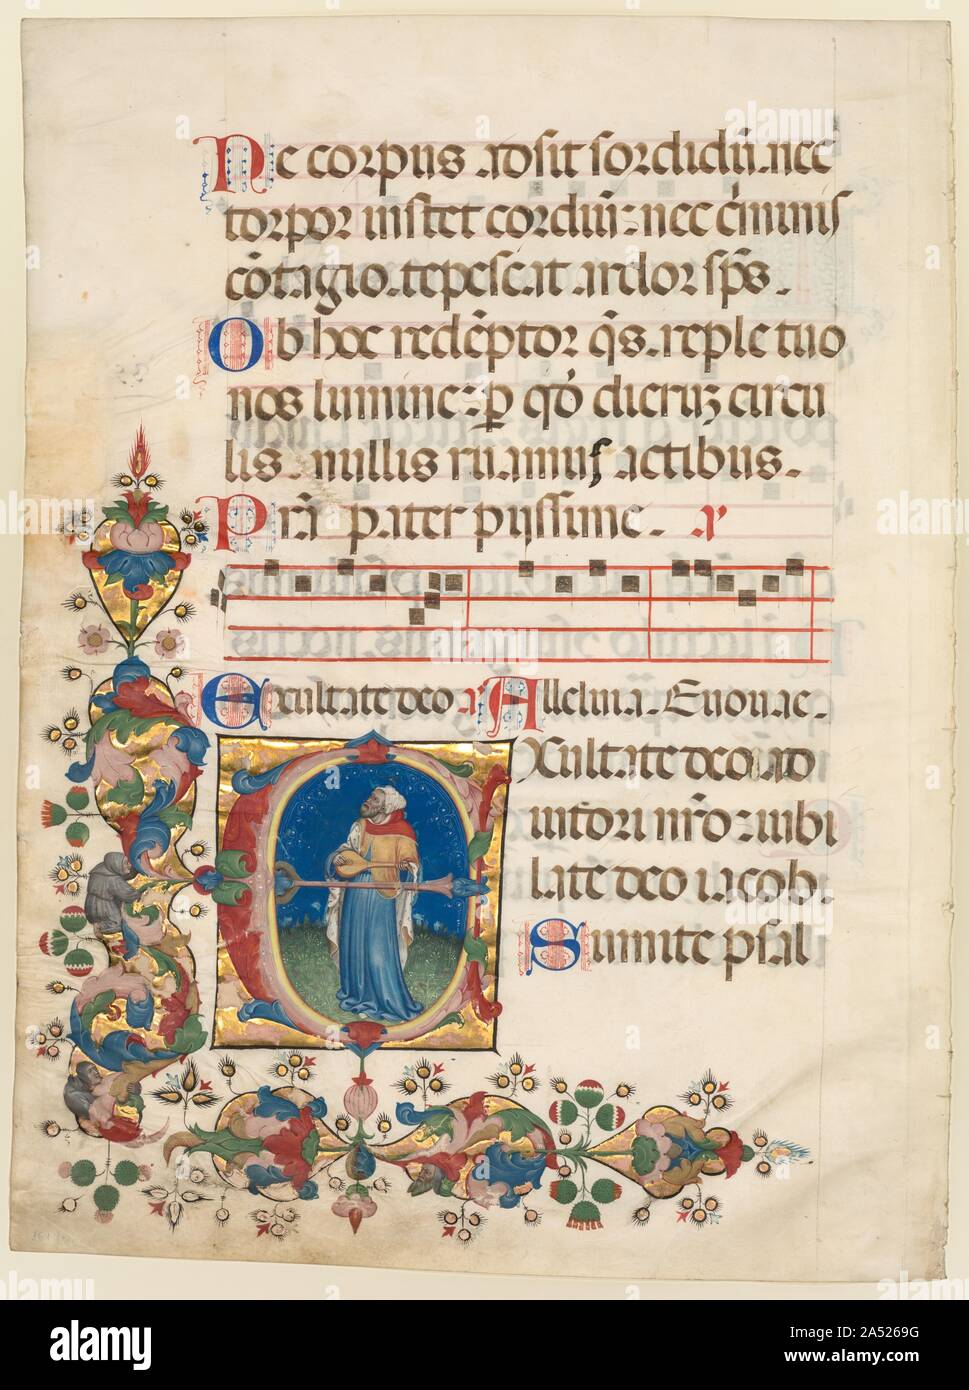 Single Leaf Excised from a Choir Psalter: Initial E[xultate Deo] with King David Playing the Lute (Psalm 80), c. 1408. This leaf once formed part of a deluxe choir psalter produced for the Franciscan convent of Bologna (founded 1229). The initial  E  with a portrait of King David illustrates the introduction to Psalm 80:  Exultate Deo  (Rejoice to God). King David, as the author of the Psalms, is prominently illustrated in psalter initials. An abundant spray of colourful acanthus leaves with clambering Franciscan friars provides decoration for the lower left margins and confirmation that it wa Stock Photo